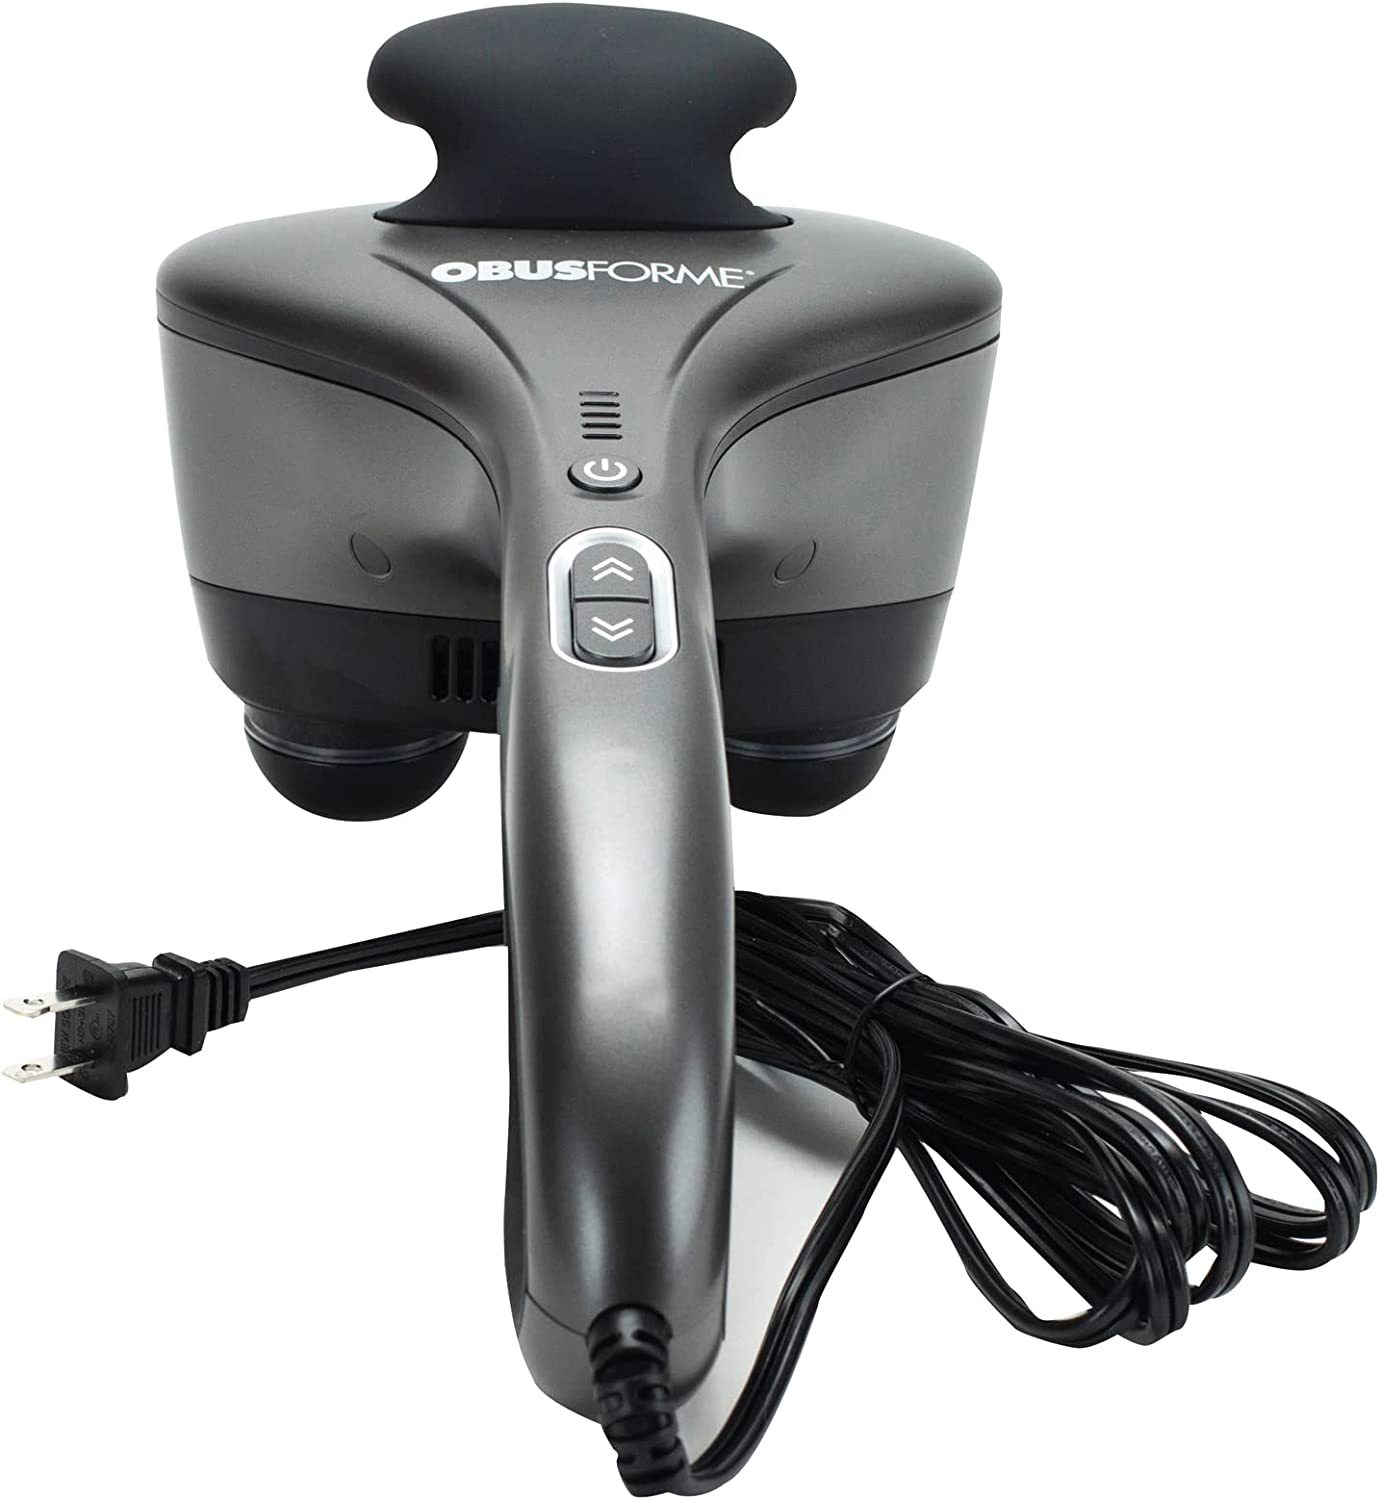 Professional Body Massager with 9 foot Power Cord